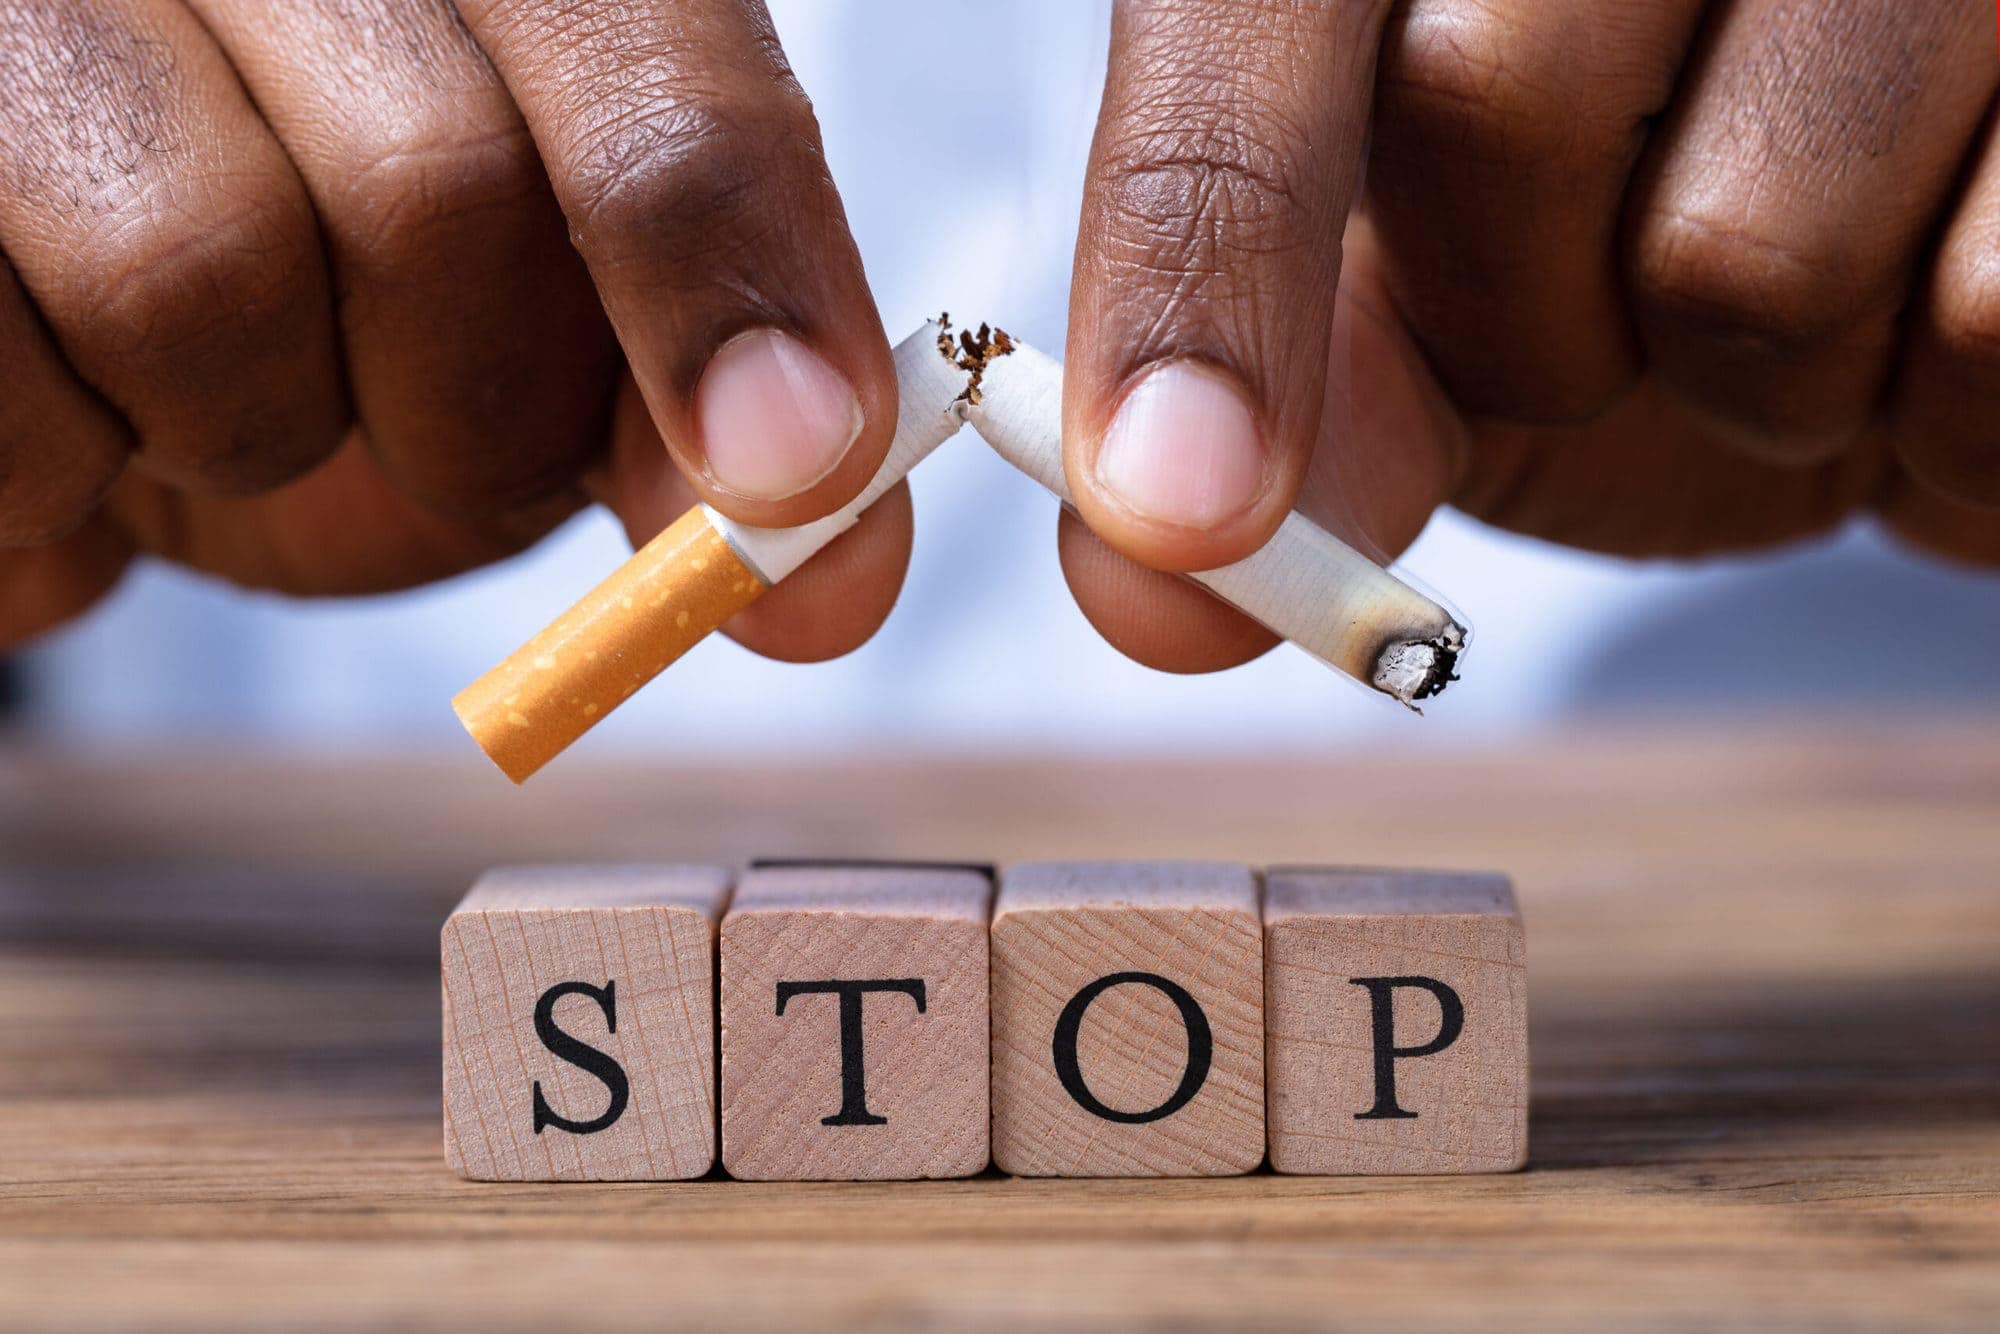 Close-up Of A Man's Hand Breaking Cigarette Over Wooden Stop Blocks